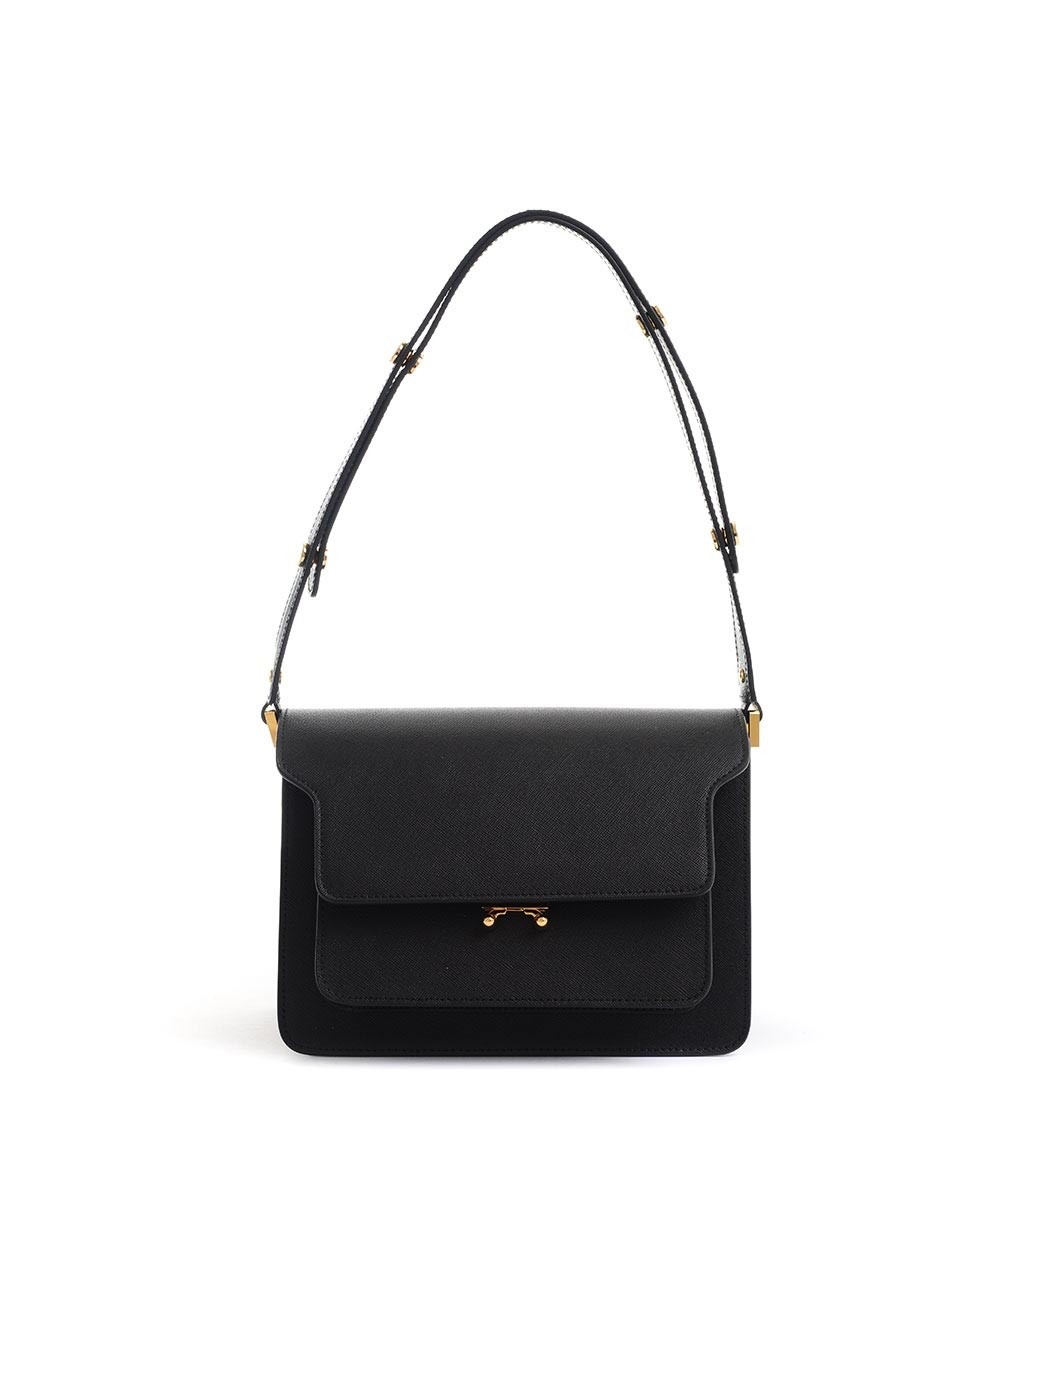  WOMAN BAGS,SPRING SUMMER COLLECTION,GIVENCHY BAGS,MARNI BAGS,LES PETITS JOUEURS BAGS  MARNI SBMPN09NO1